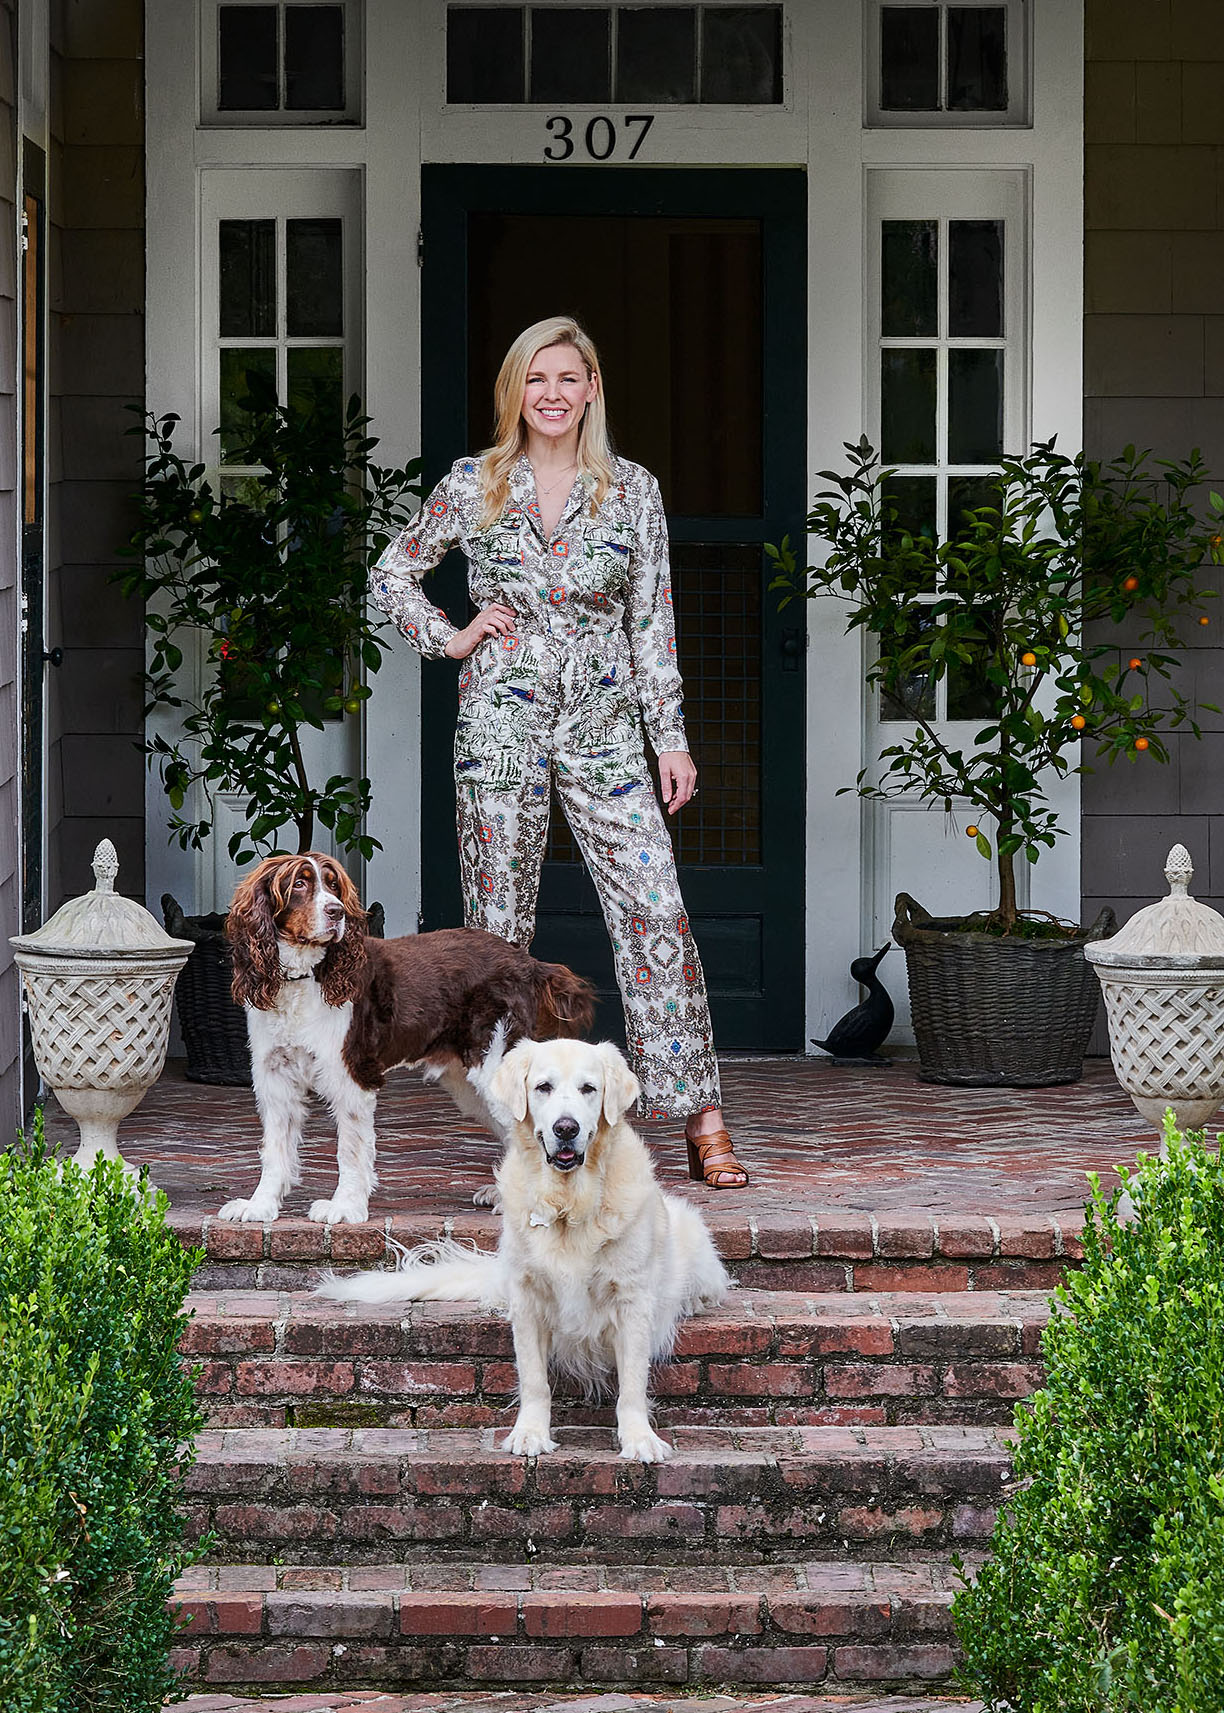 Homeowner on porch with dogs  in Arkansas Home by Heather Chadduck in Veranda Magazine by Alison Gootee photography